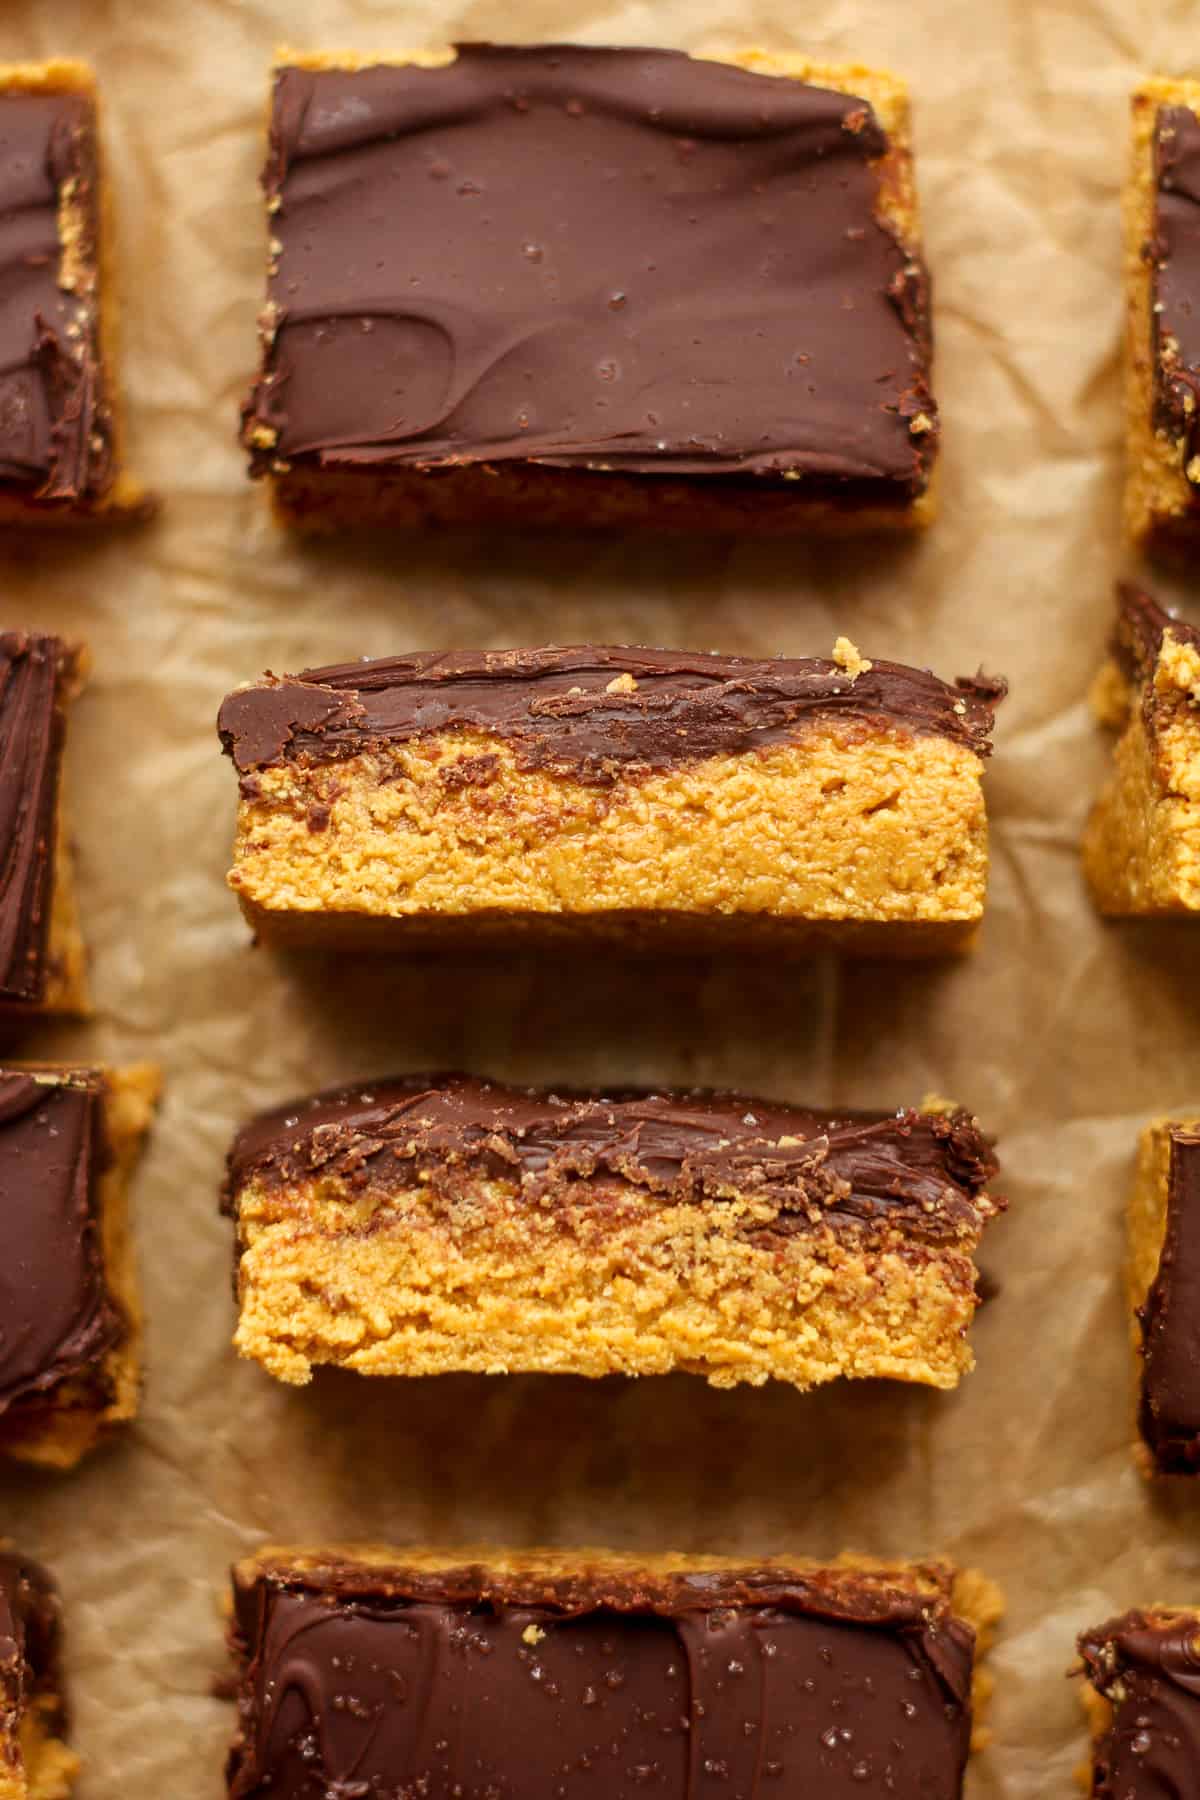 Closeup on some chocolate peanut butter bars, with some showing the sides.